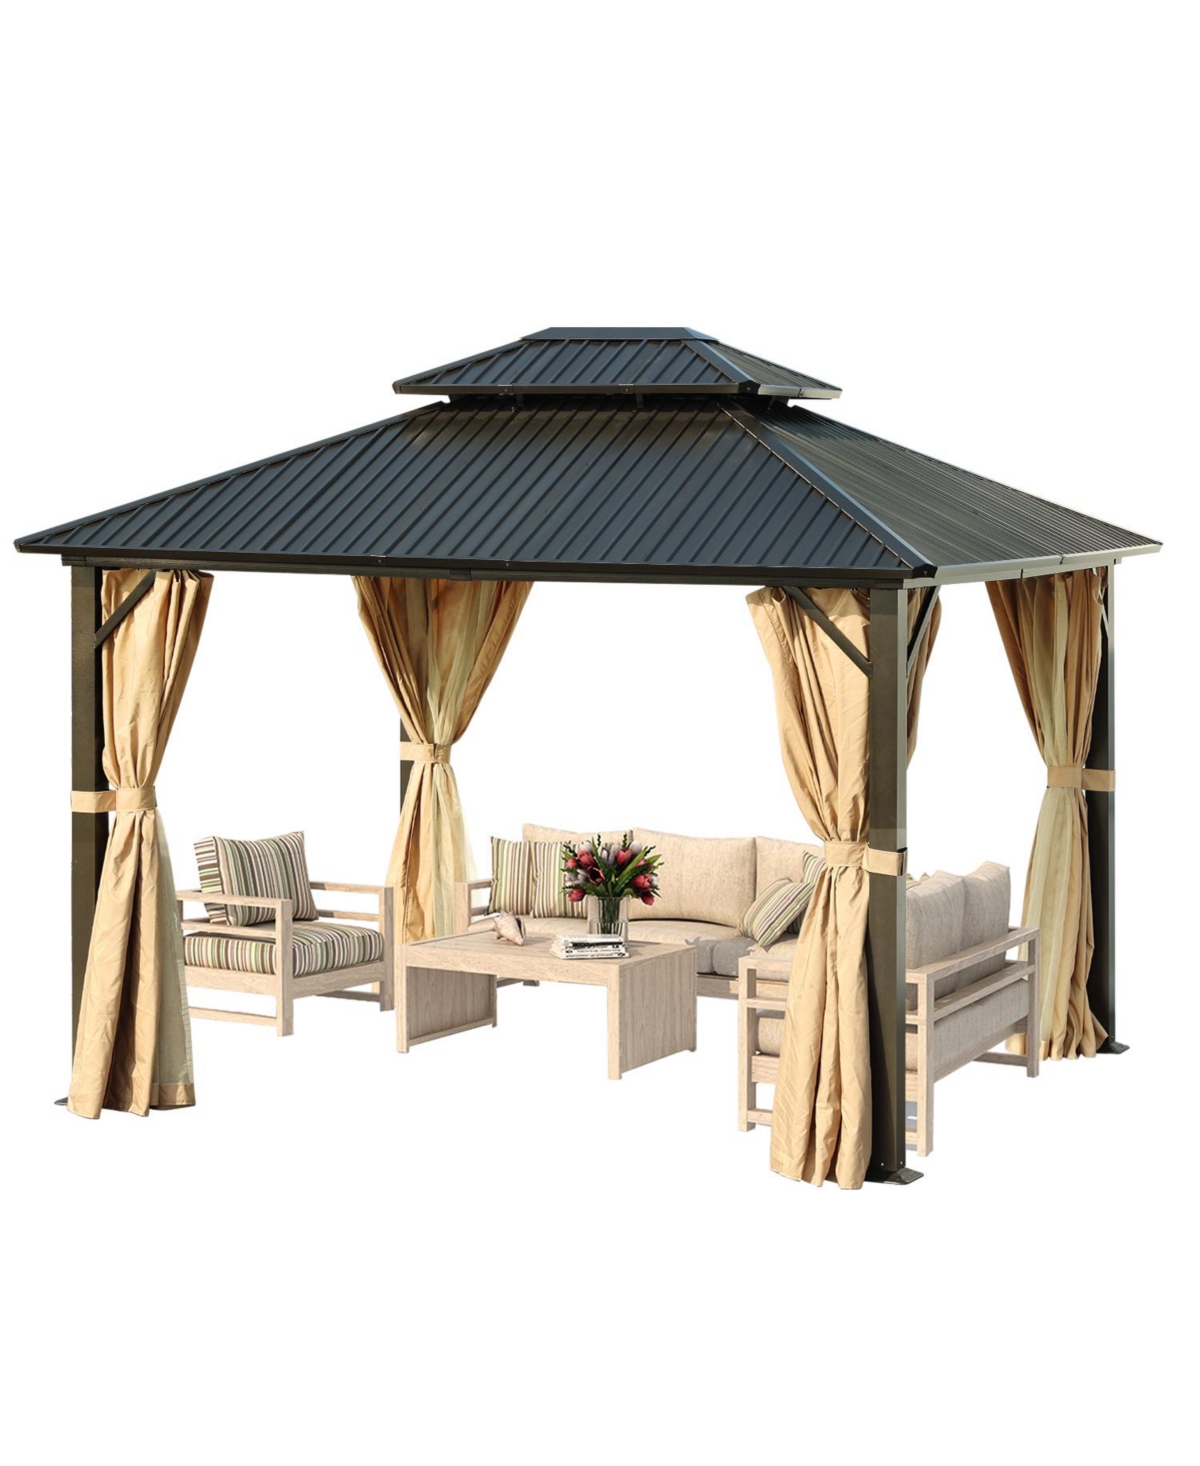 Hardtop Gazebo Outdoor Tent Shelter Canopy 10.2'x11.8'x9.8' with Netting - Black